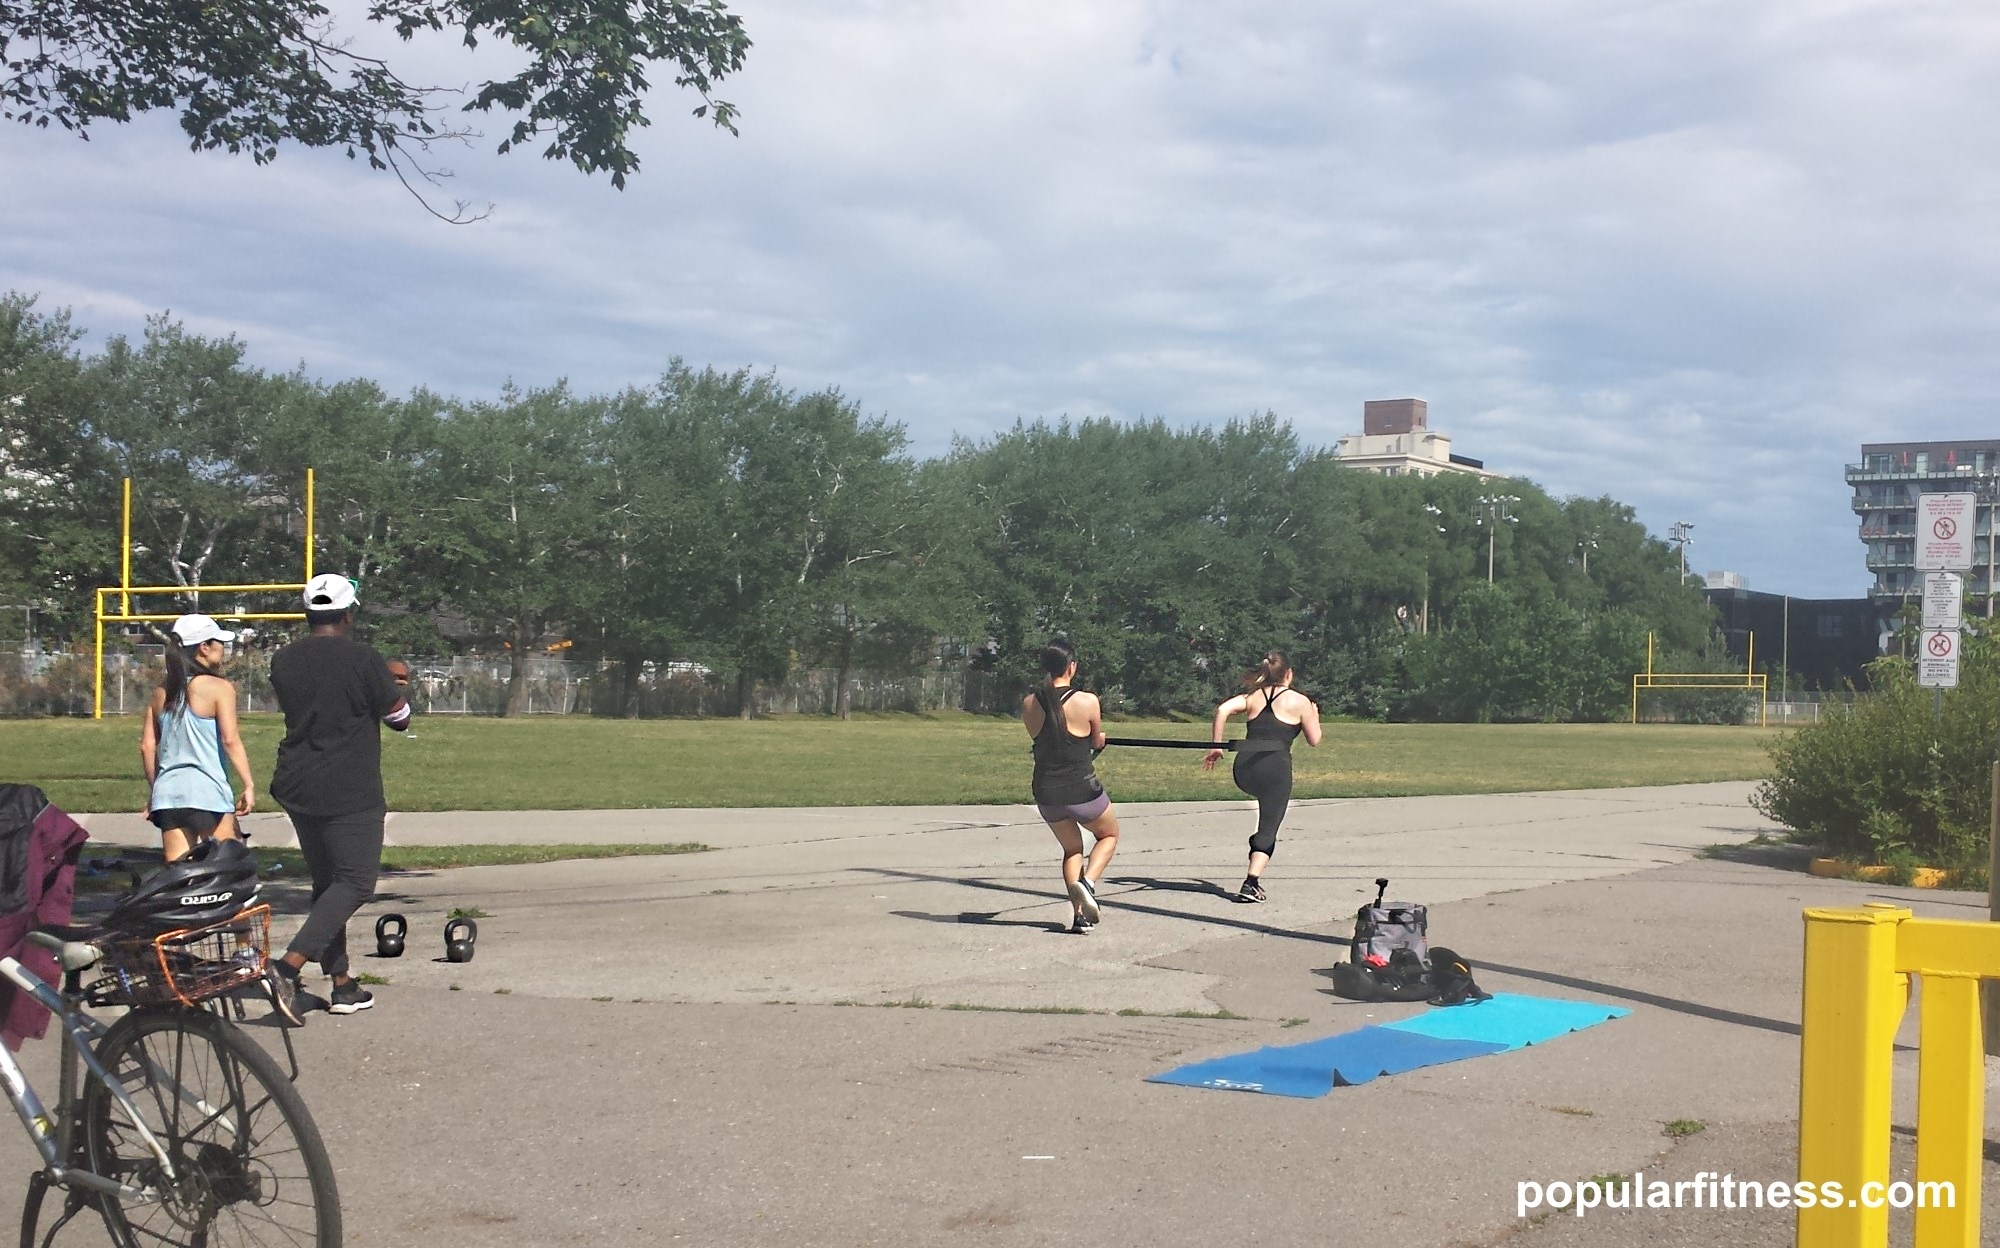 Women exercising outdoors in summer while being personally trained by a personal trainer - photo by popular fitness